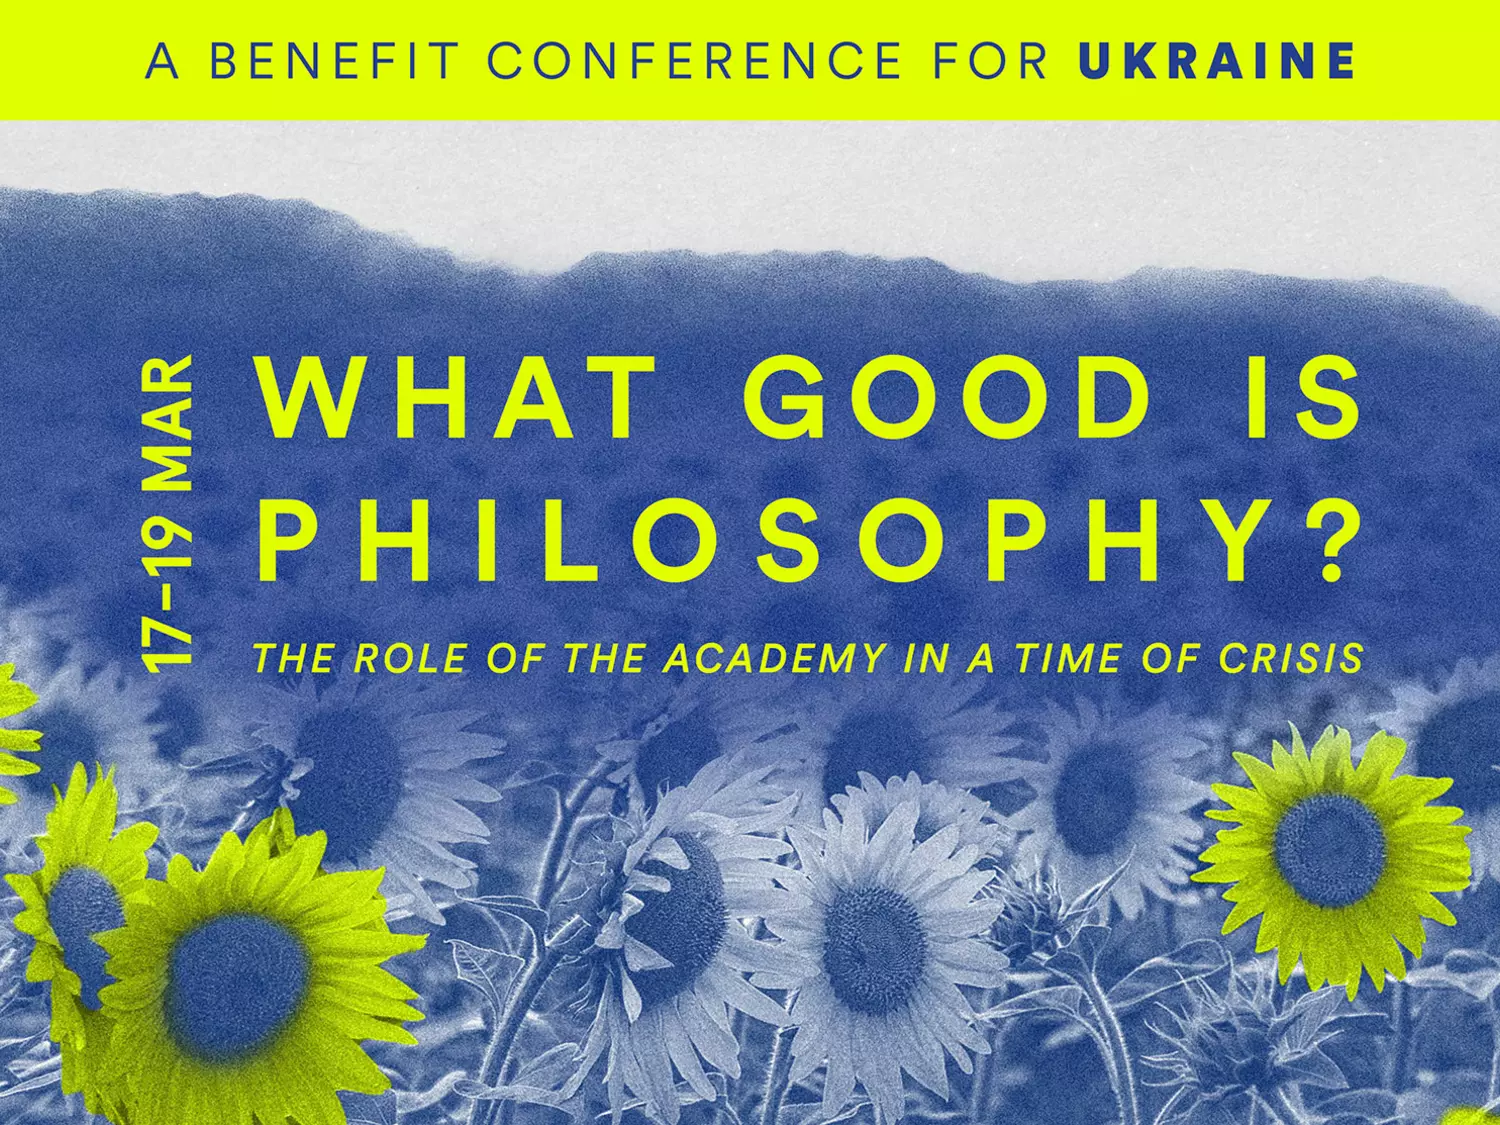 What good is philosophy? The role of the academy in a time of crisis